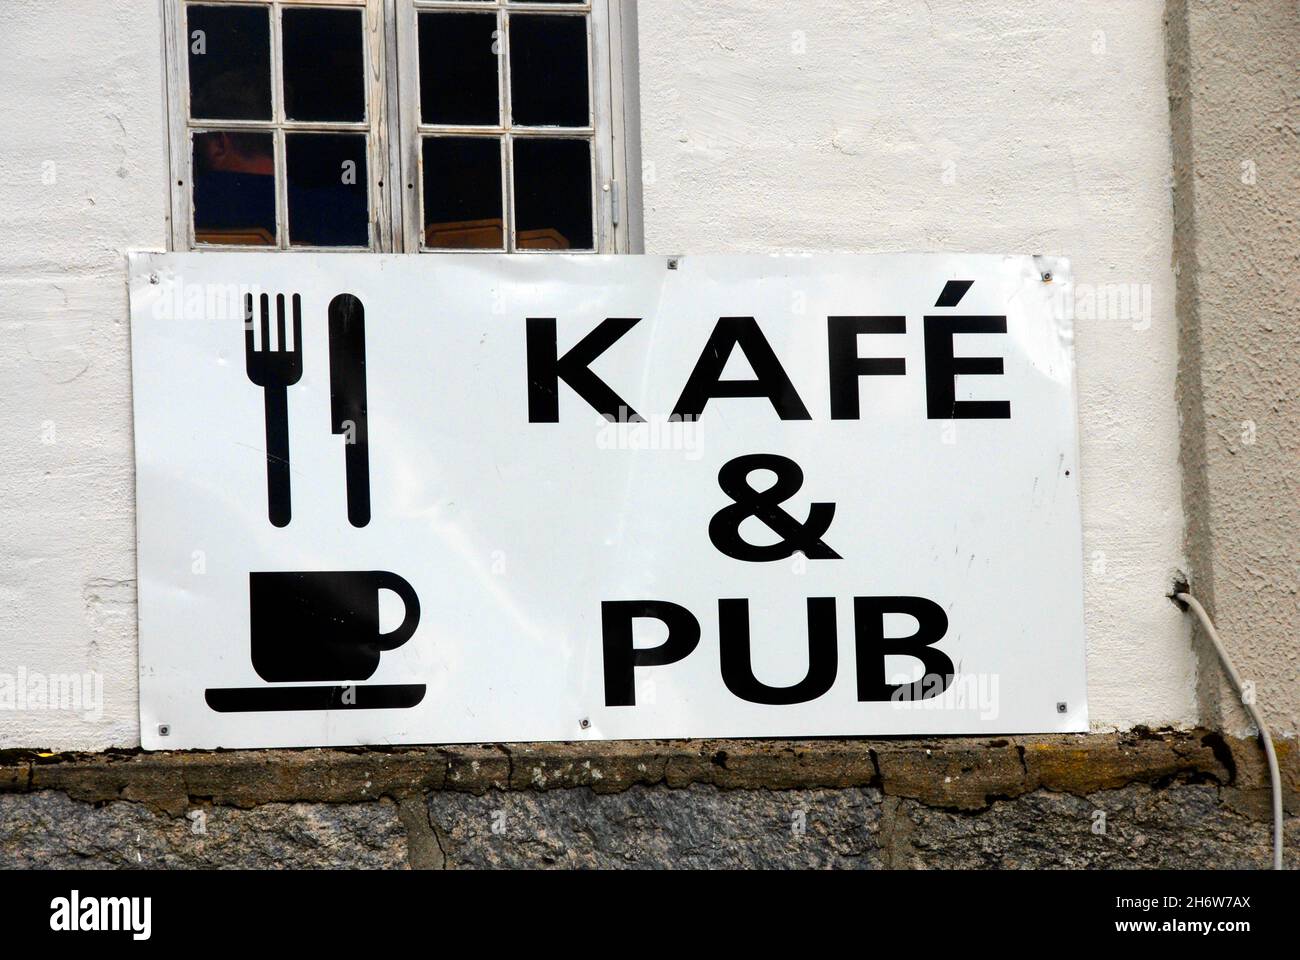 Sign for café & pub, Olden, Norway Stock Photo